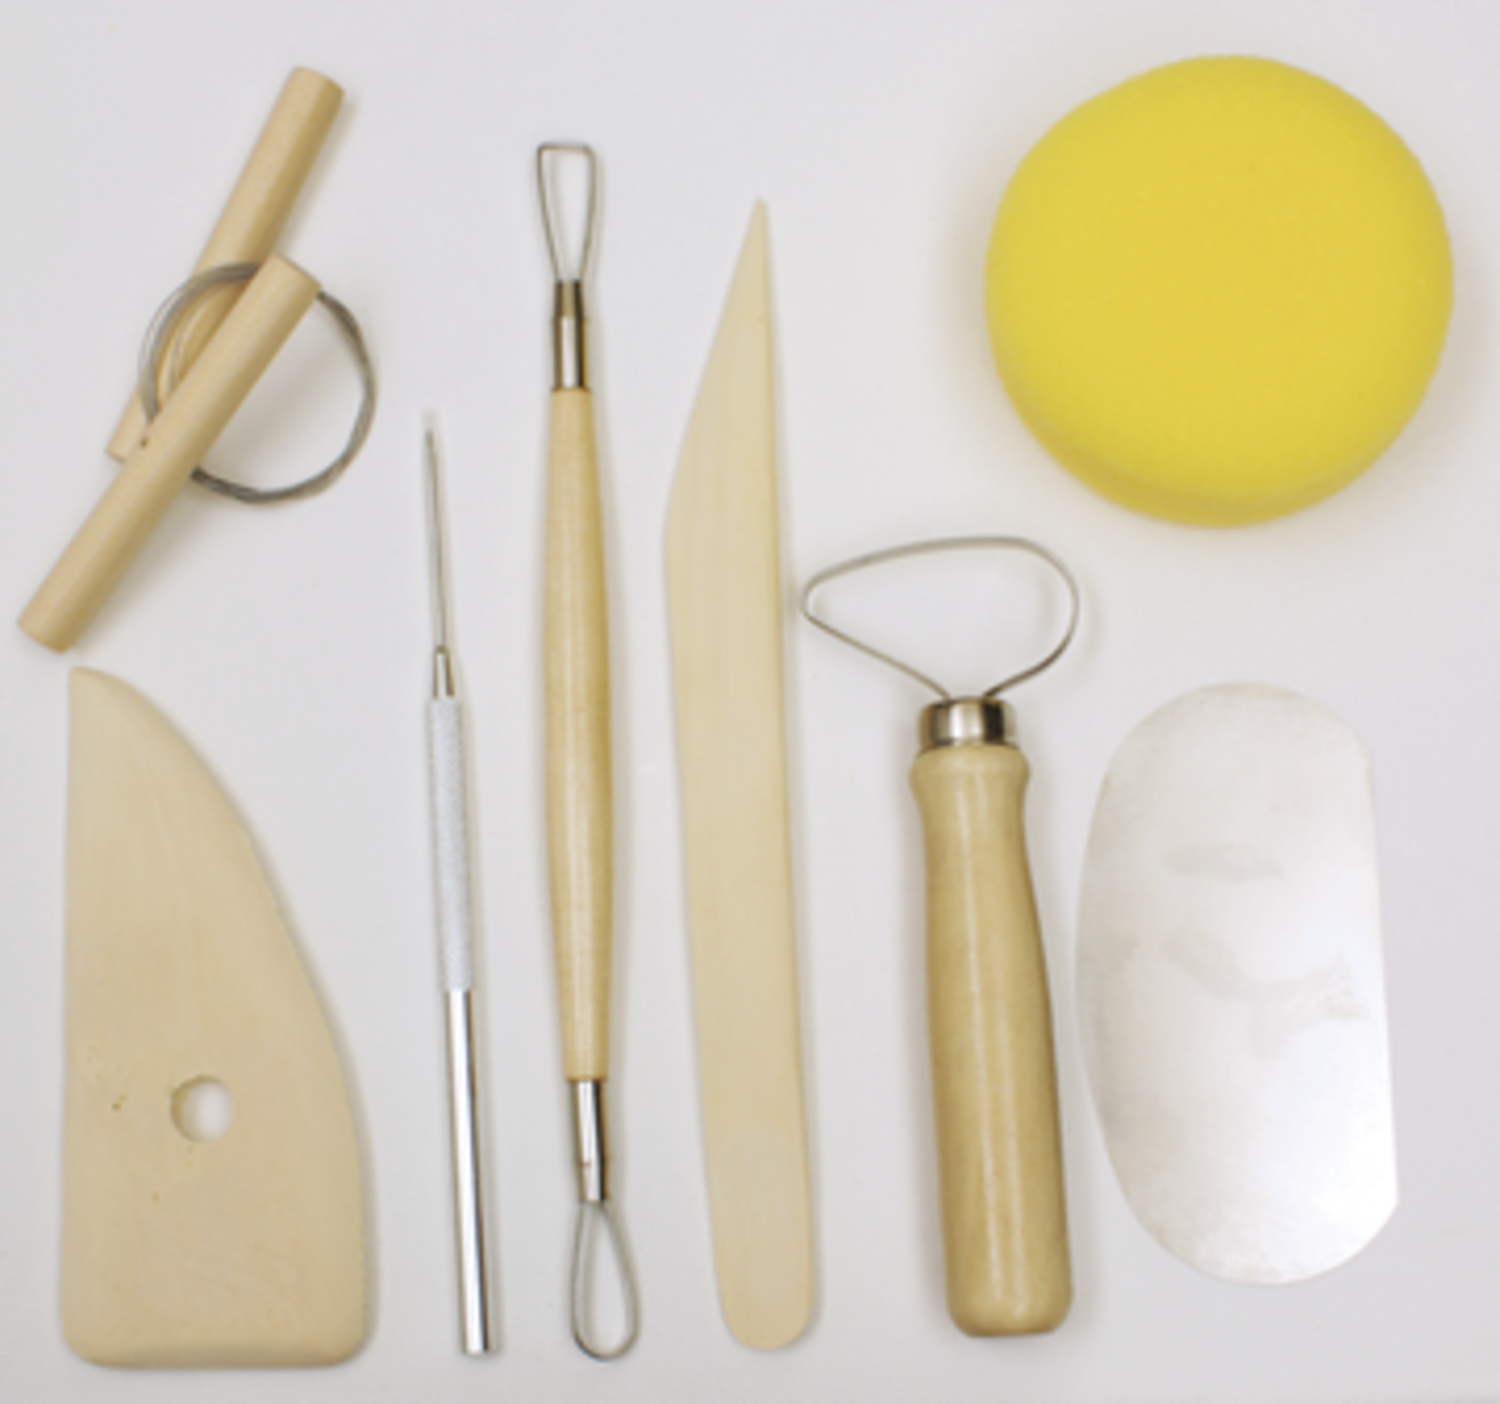 National Artcraft Potter's Tool Kit Contains 8 Essential Tools for Trimming, Shaping and Smoothing Pottery and Ceramic Clay Surfaces